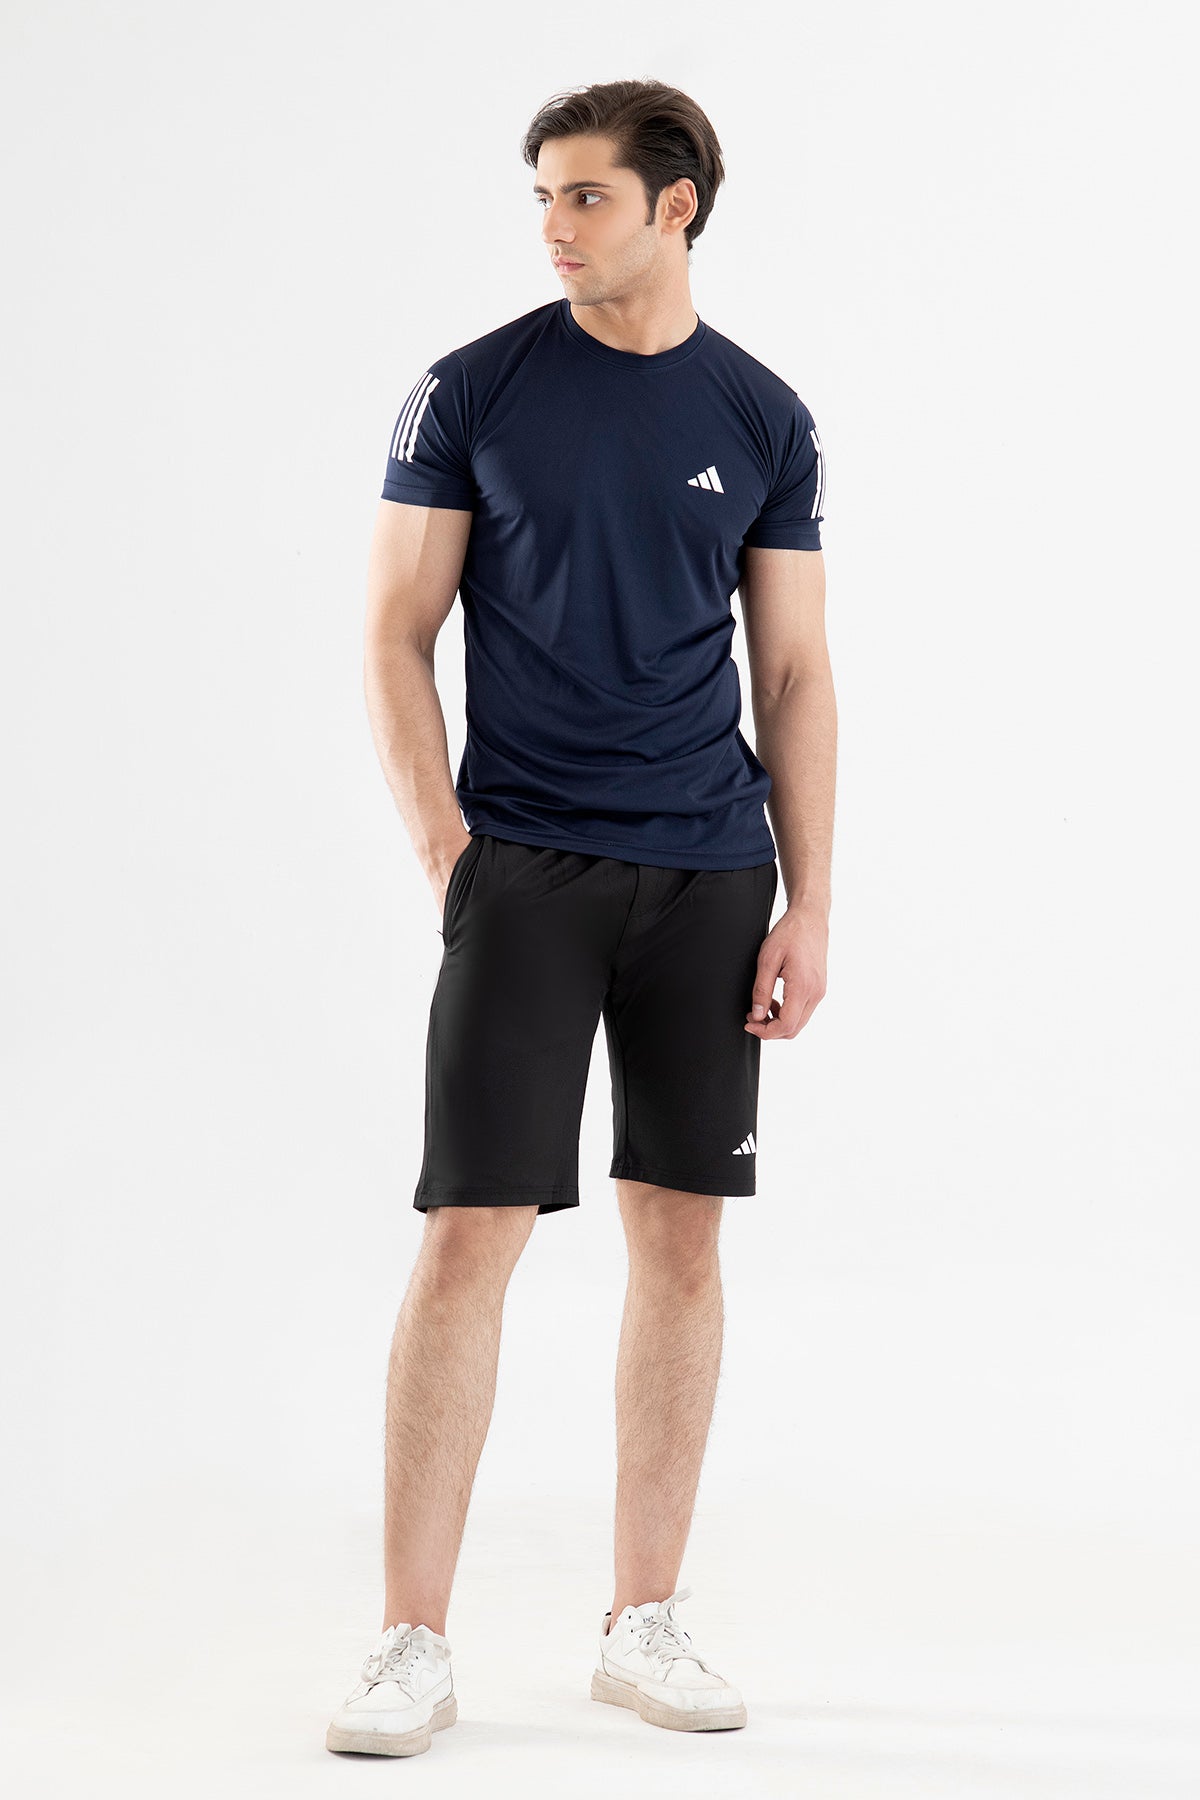 Adidas Navy Blue Dry-Fit Tee